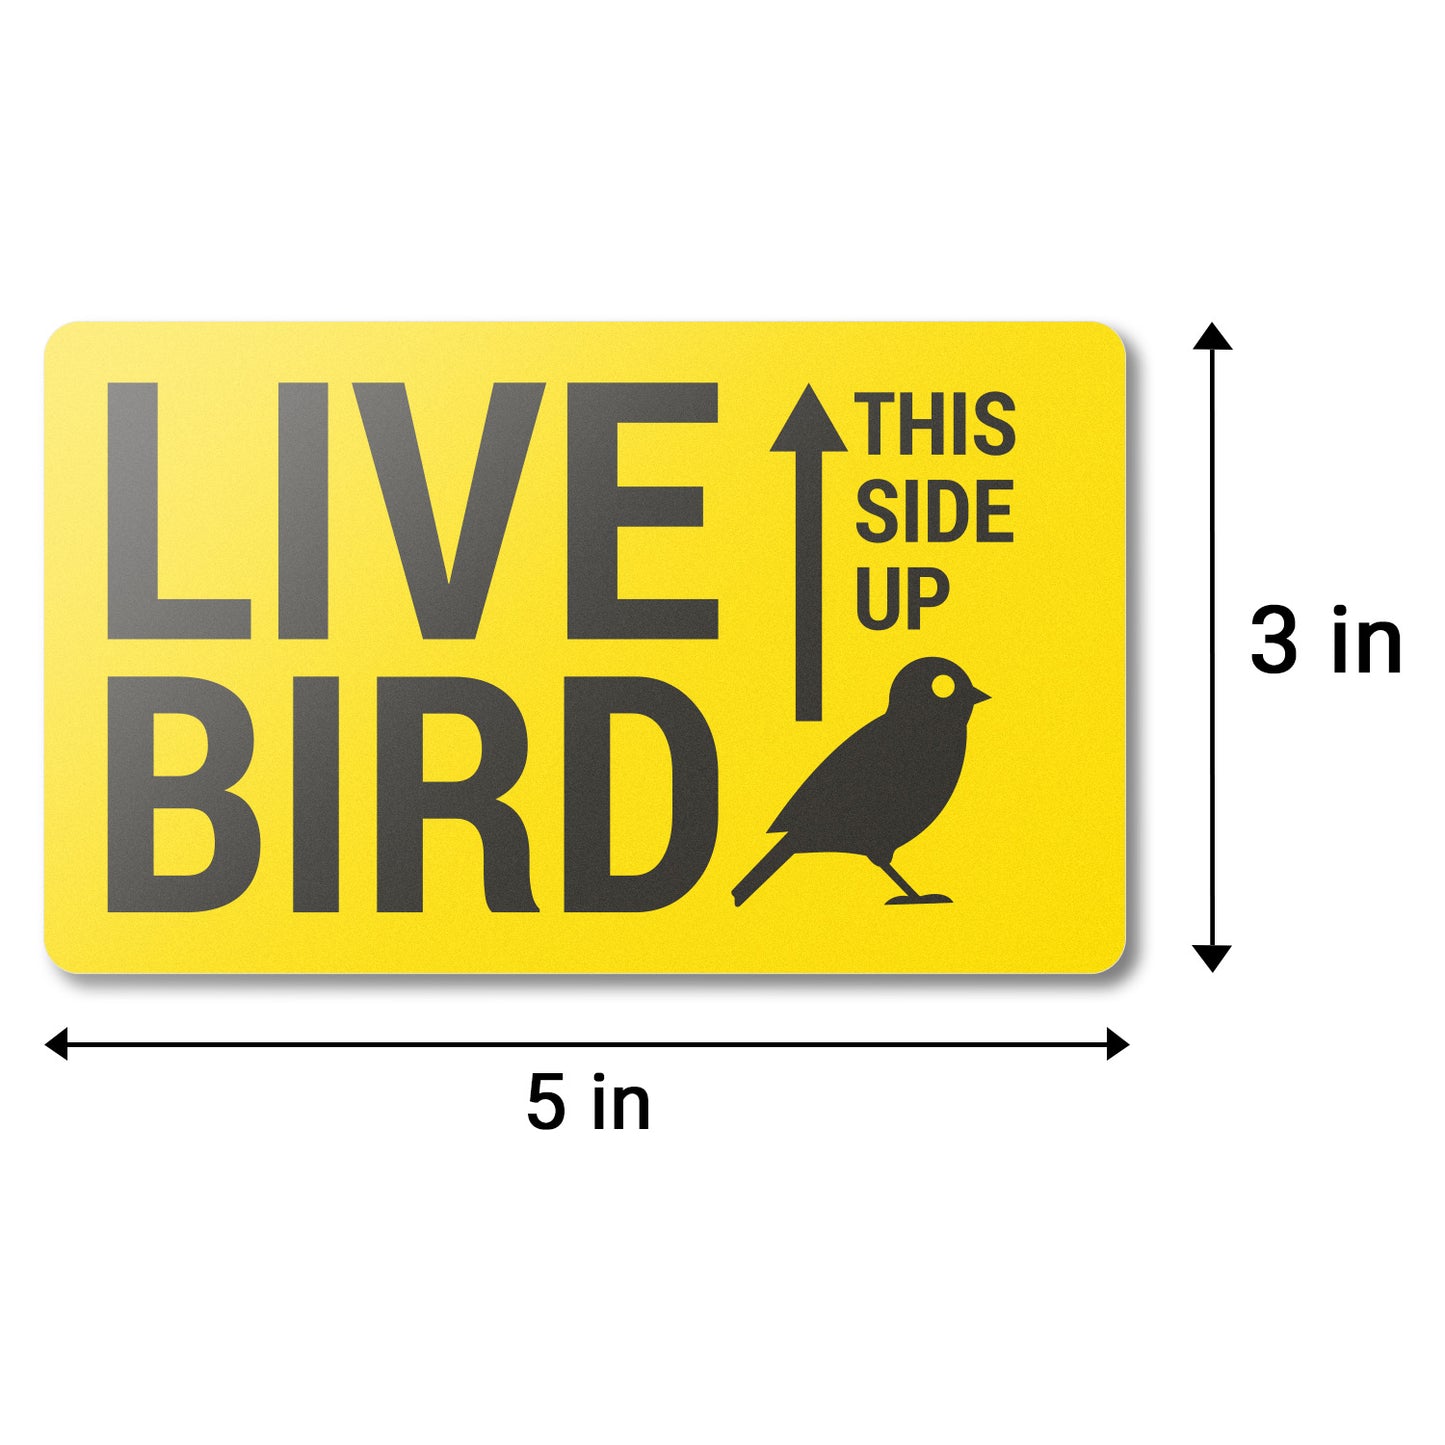 5 x 3 inch | Shipping & Handling: This Side Up, Live Bird Stickers